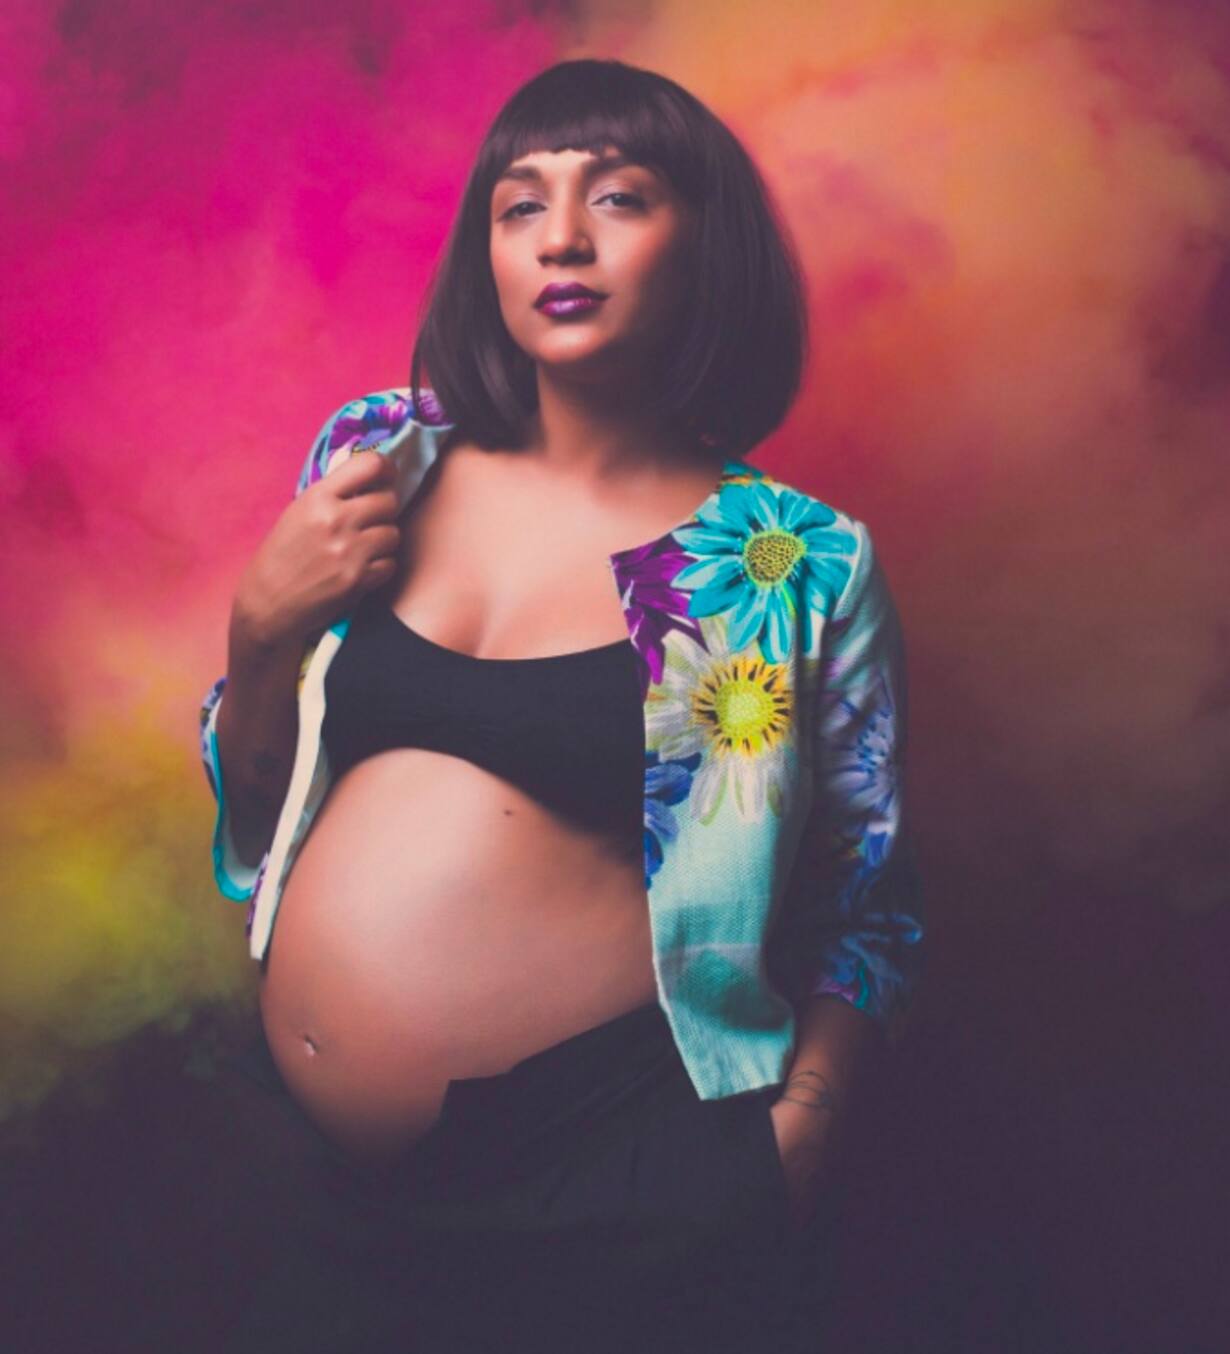 Shweta's pregnancy photoshoot is bold and inspiring